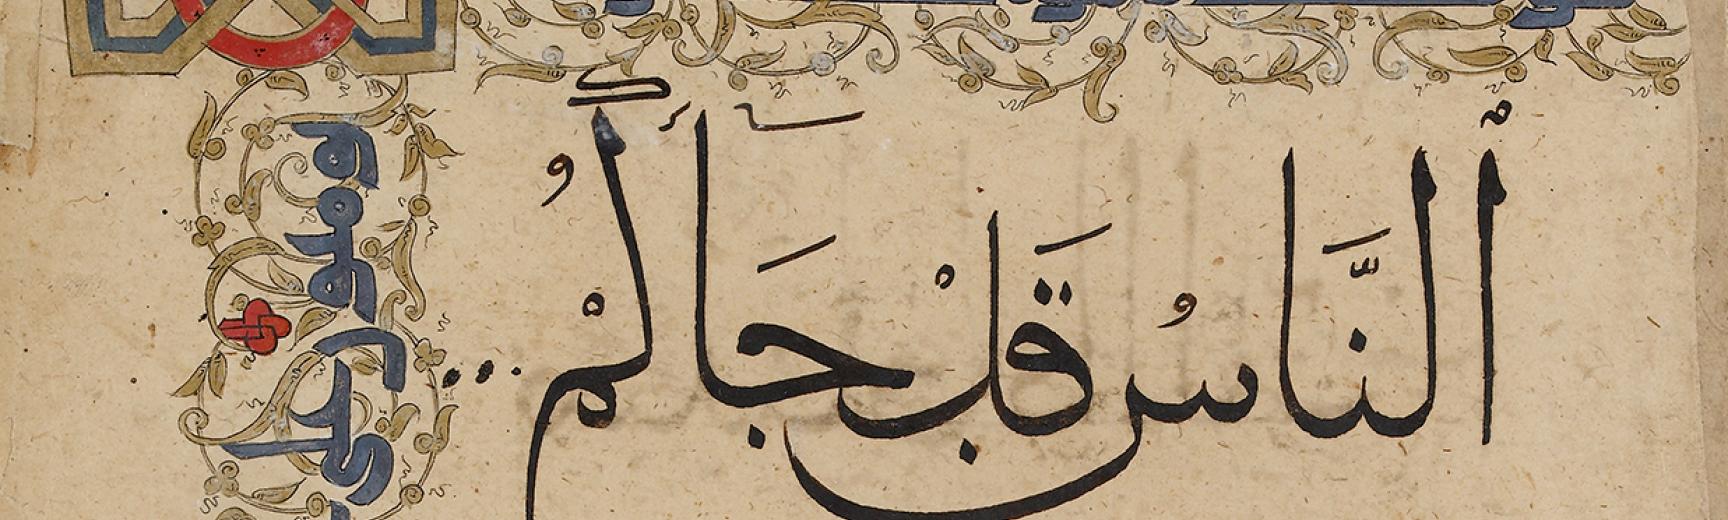 Page from a Qur’an in muhaqqaq, naskhi, and kufic script